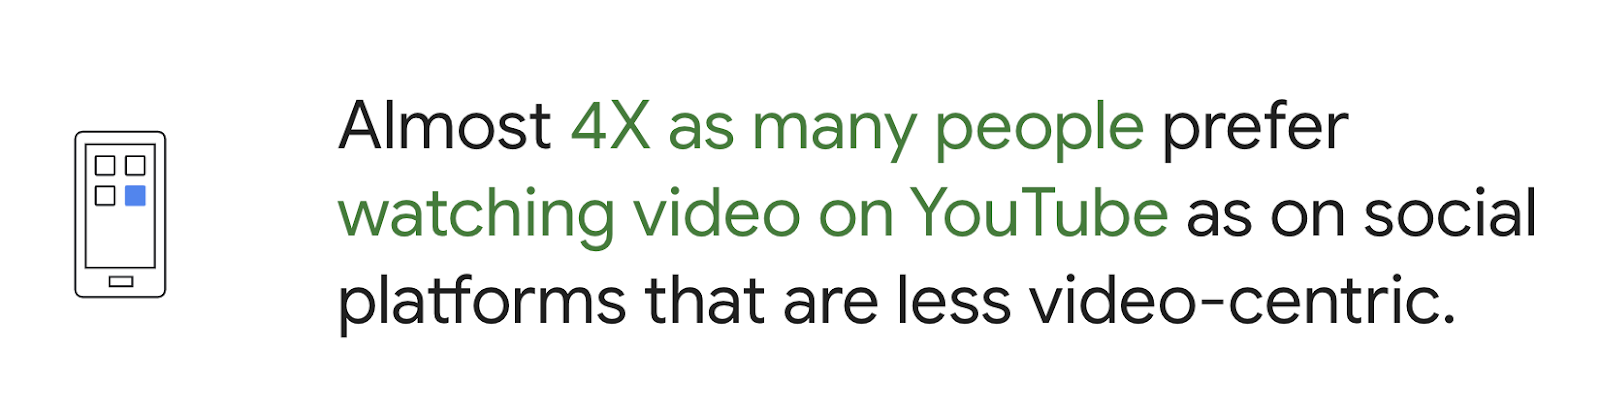 Google survey's data showed that almost 4X as many people prefer watching video on YouTube as on social platforms that are less video-centric